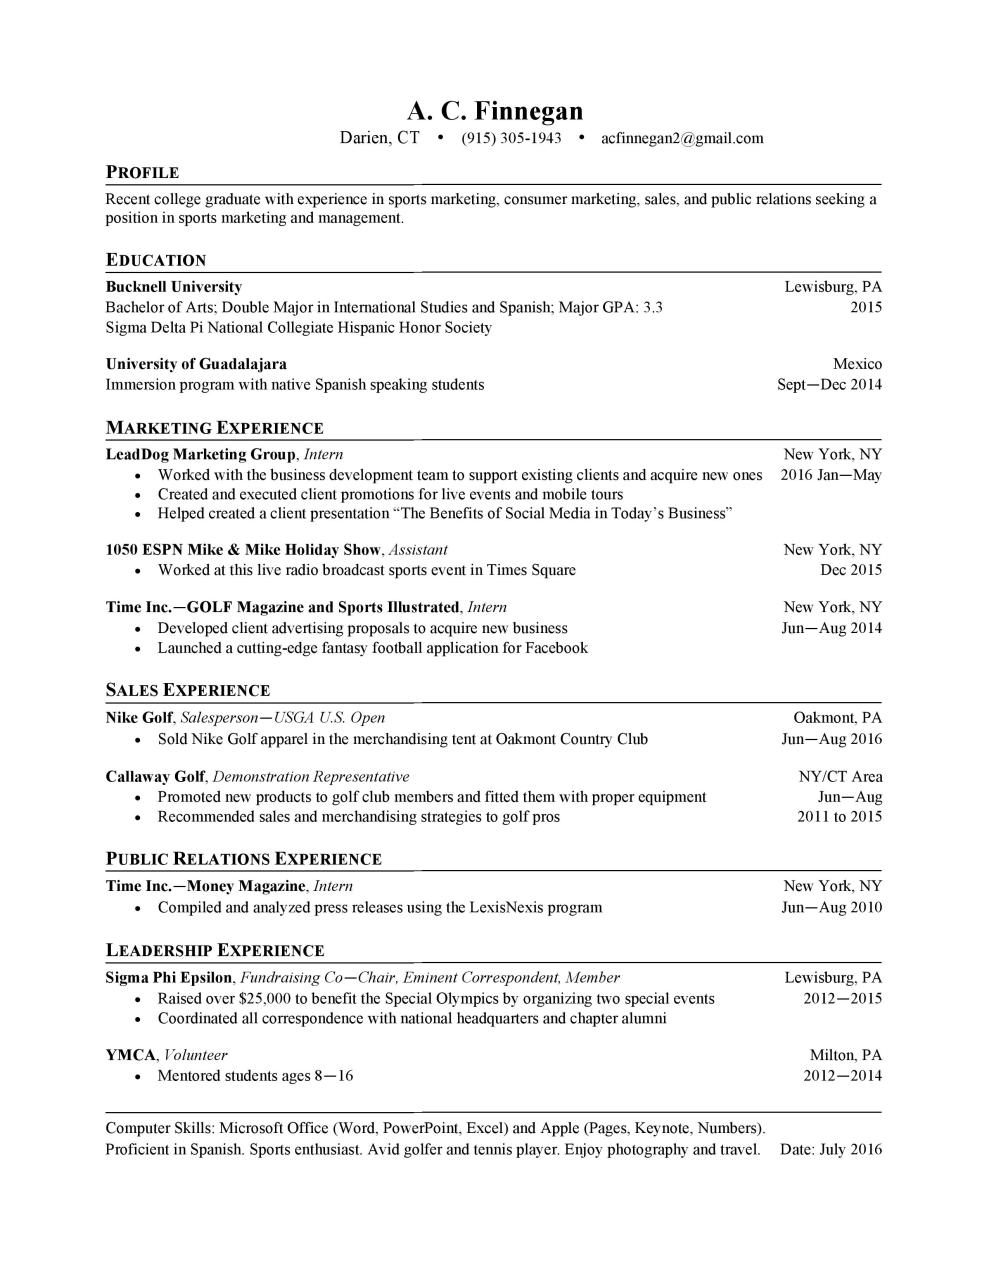 How To Put A Dual Degree On Resume